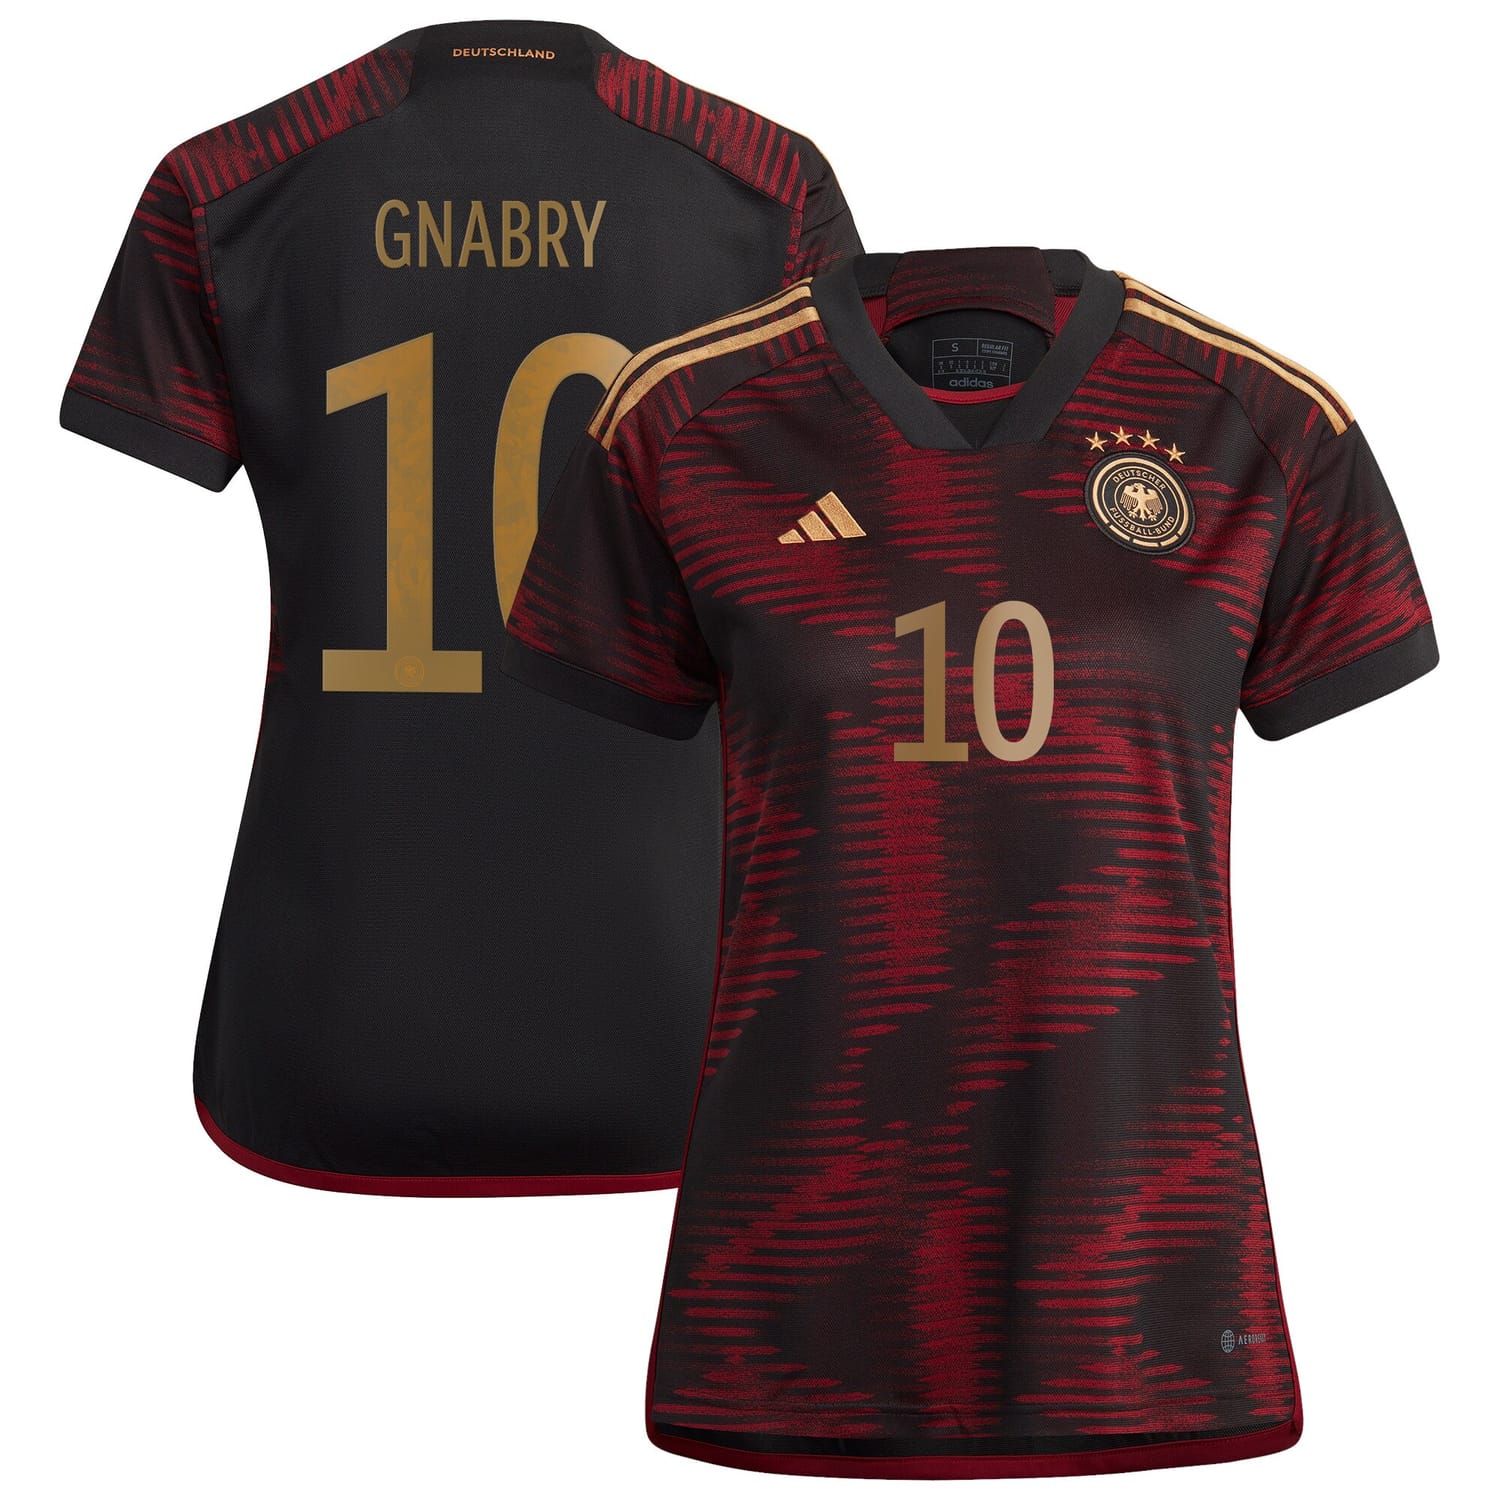 Germany National Team Away Jersey Shirt player Serge Gnabry 10 printing for Women